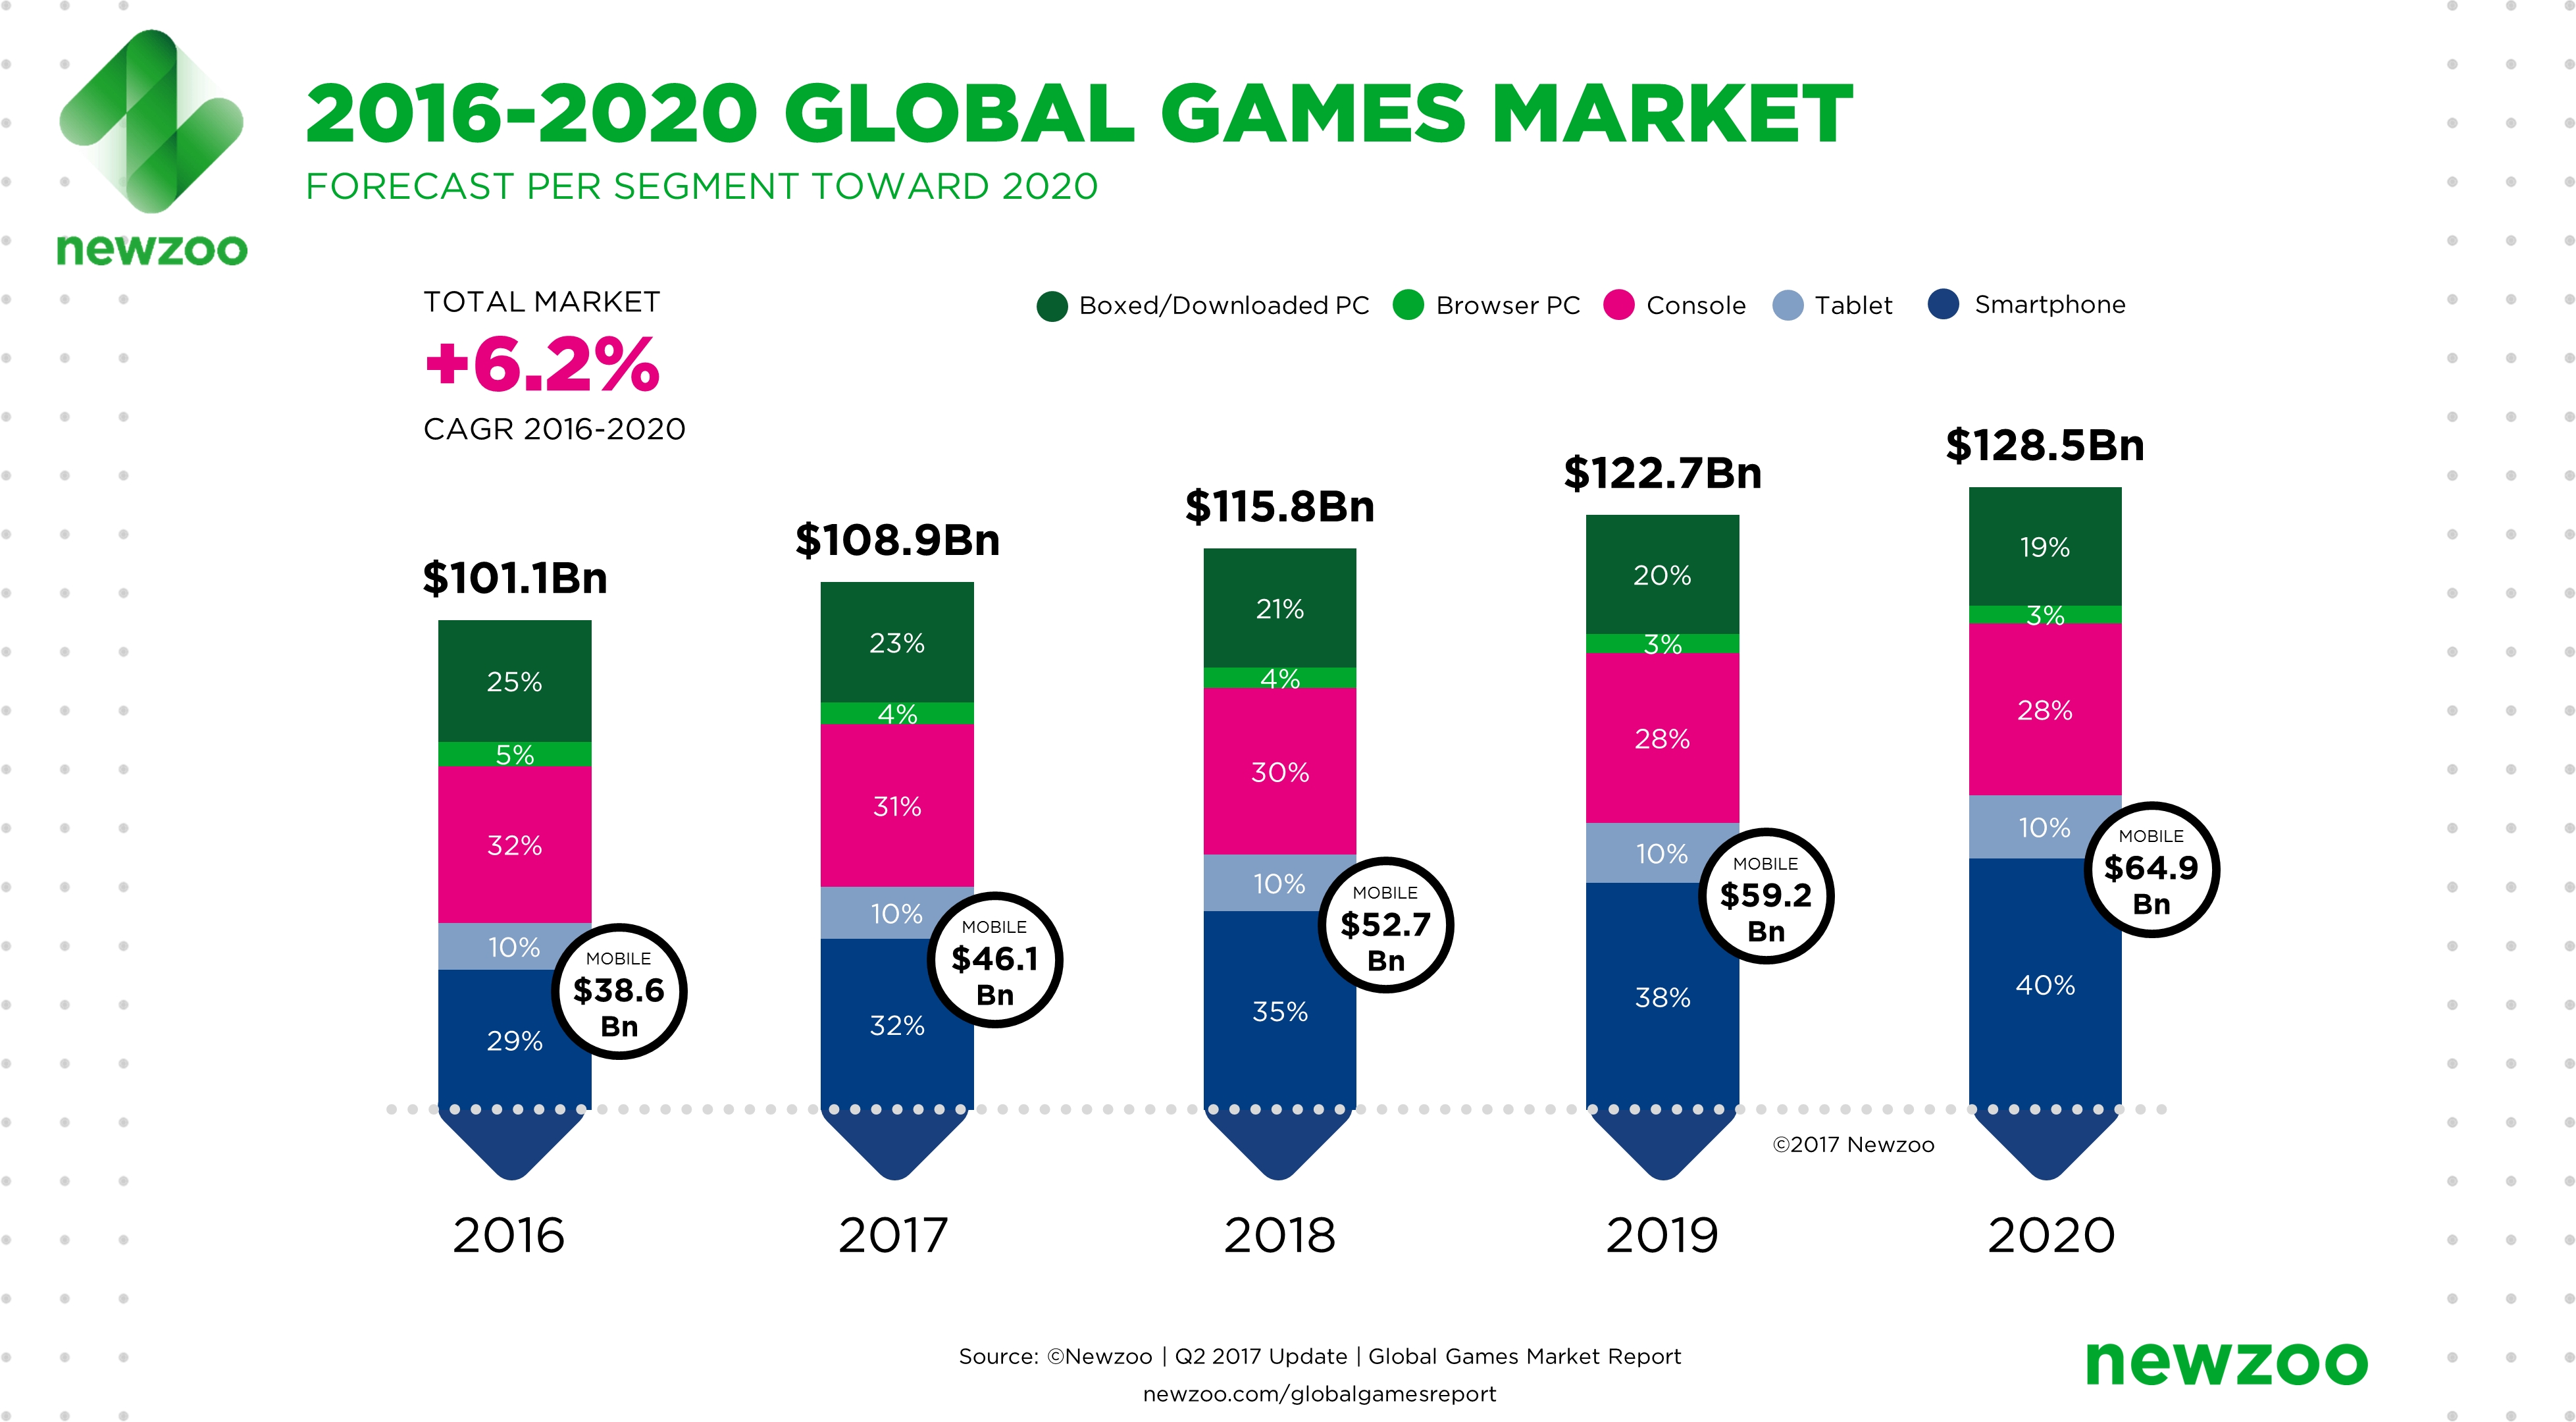 Mobile Gaming to Represent More than Half of Total Game Revenue by 2020